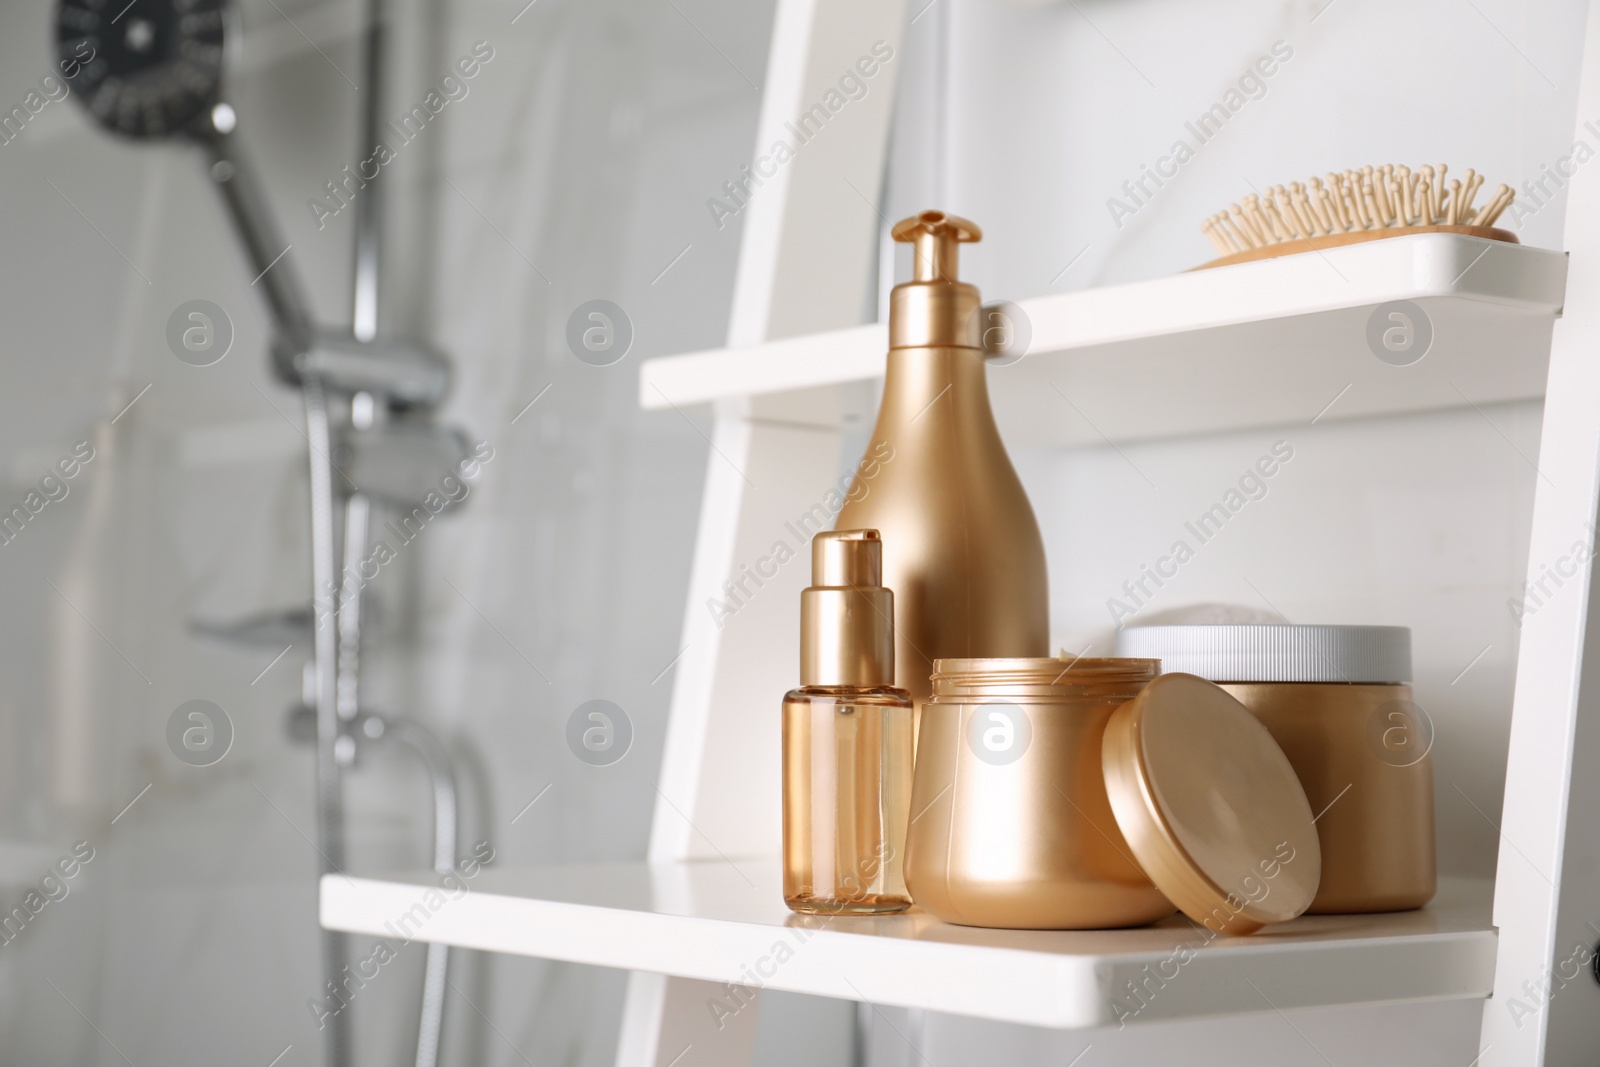 Photo of Different hair care products and brush on shelving unit in bathroom